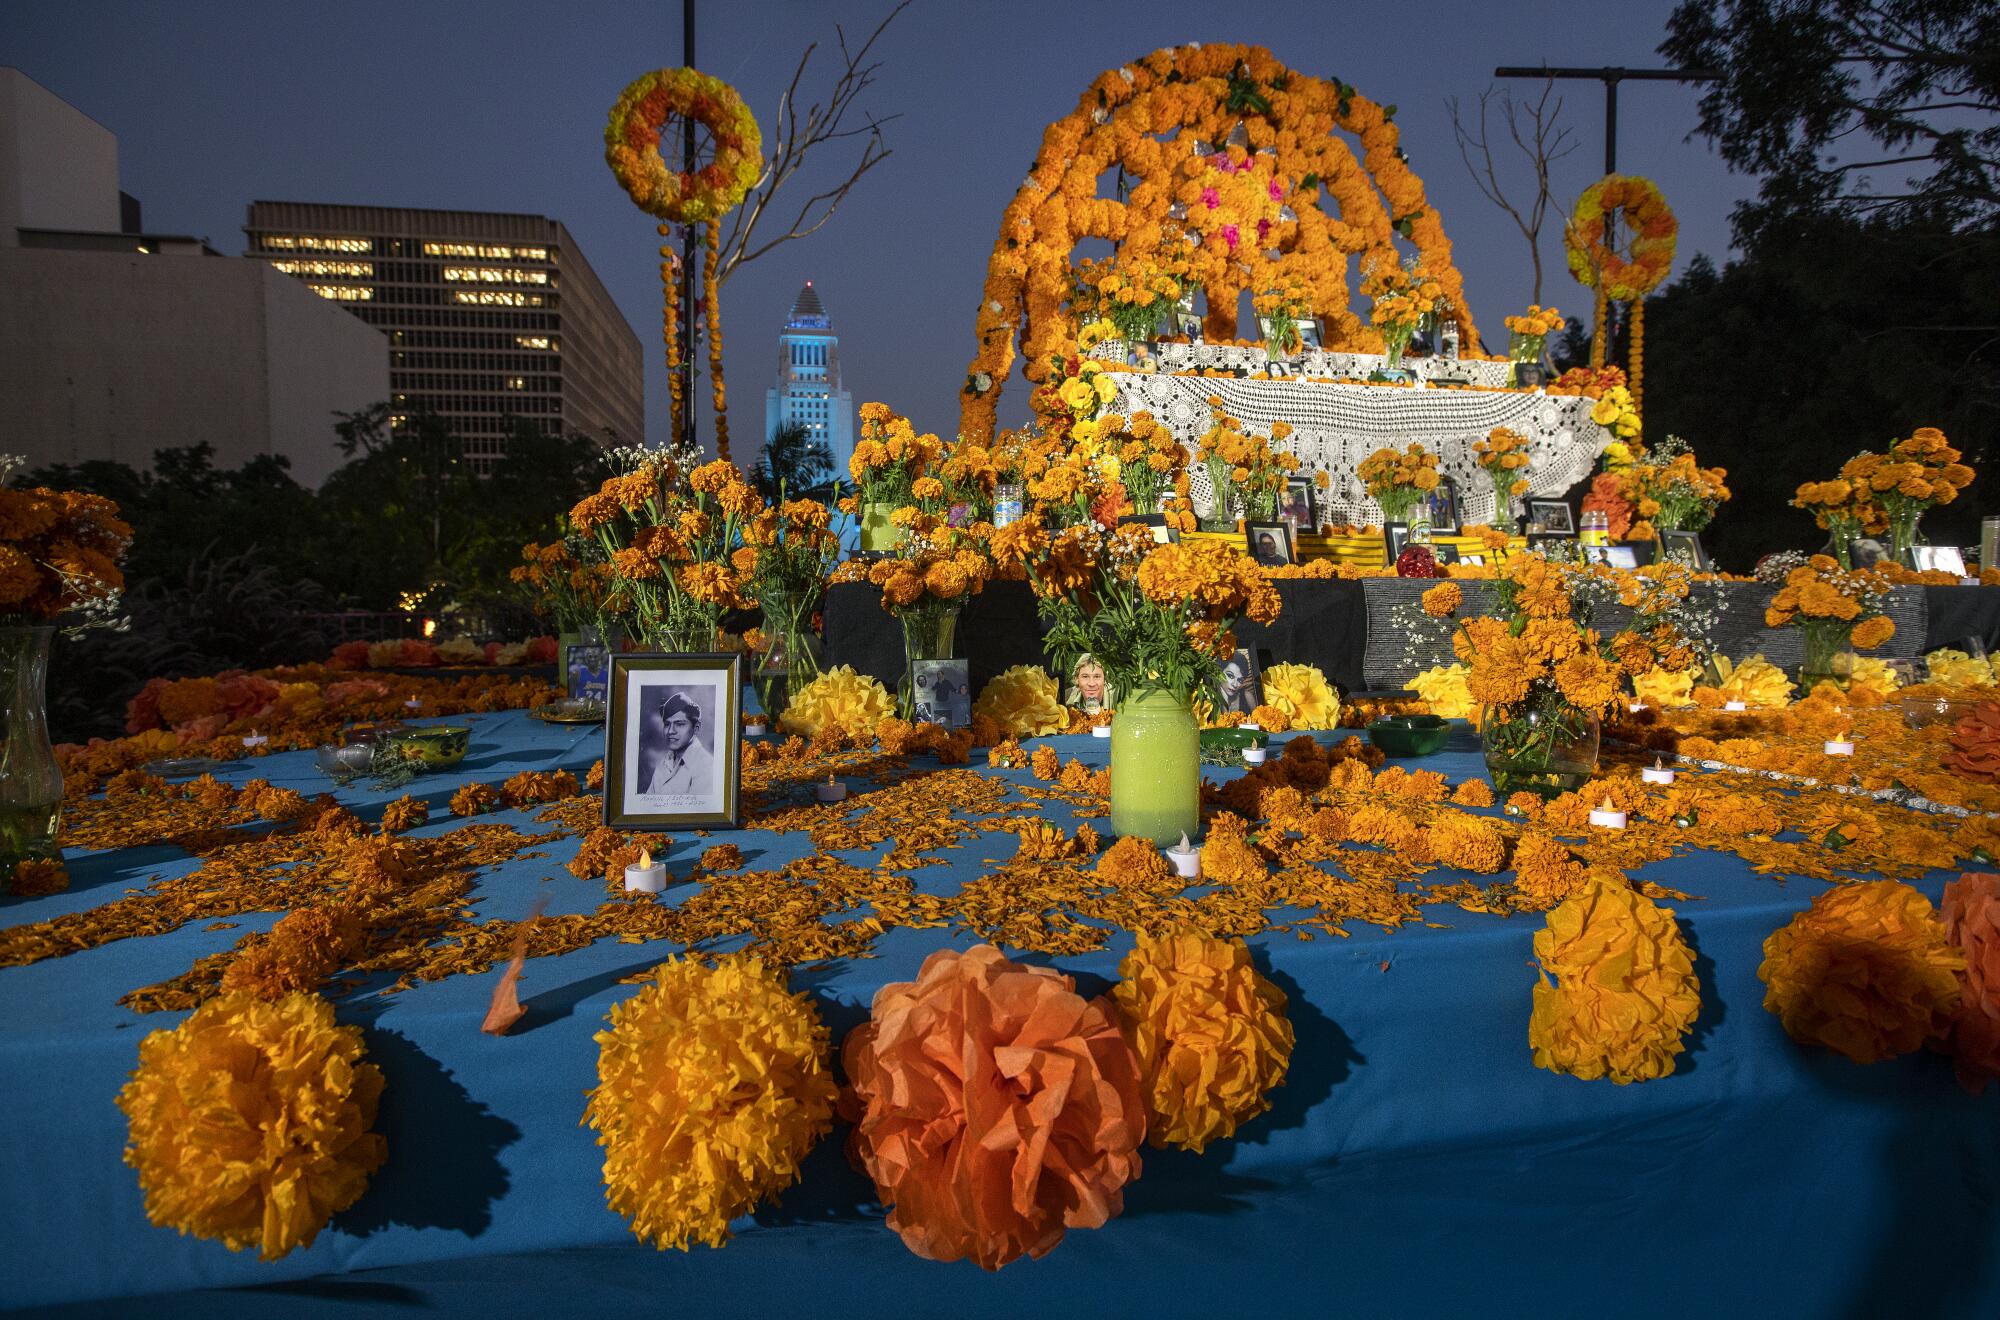 The orange flowers, photos and candles of the community altar are seen at dusk.